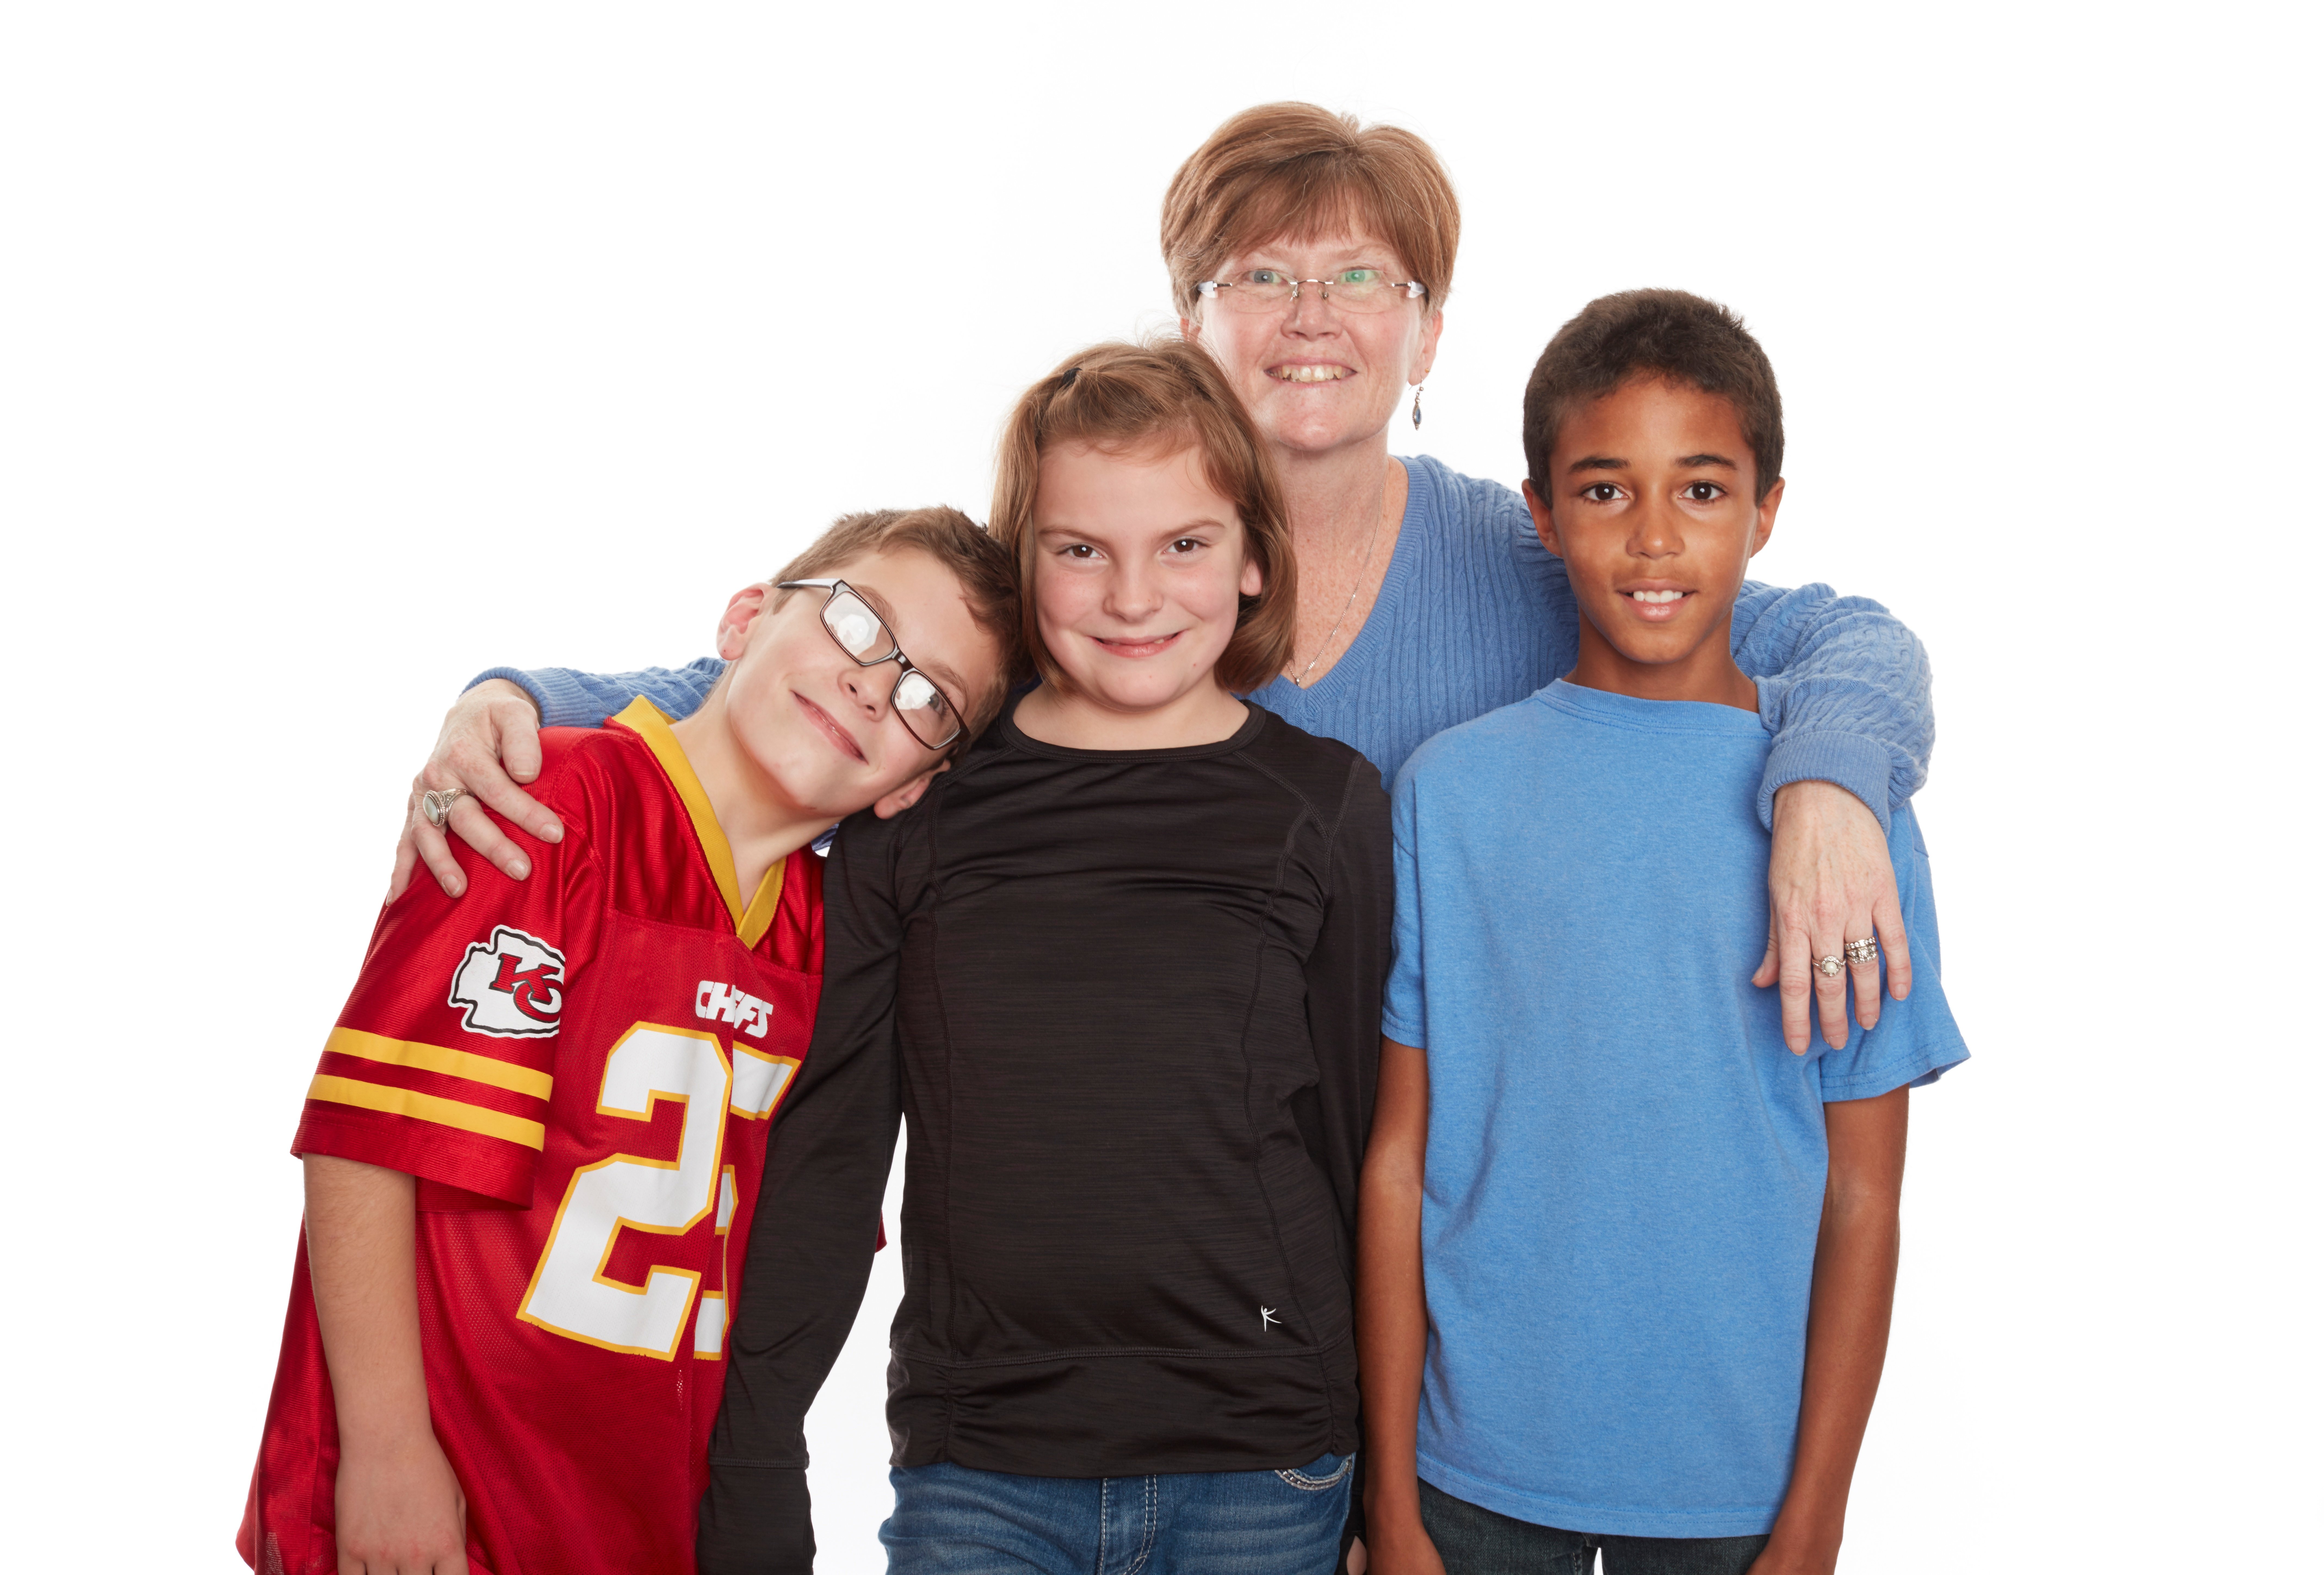 learn more about foster parenting in missouri